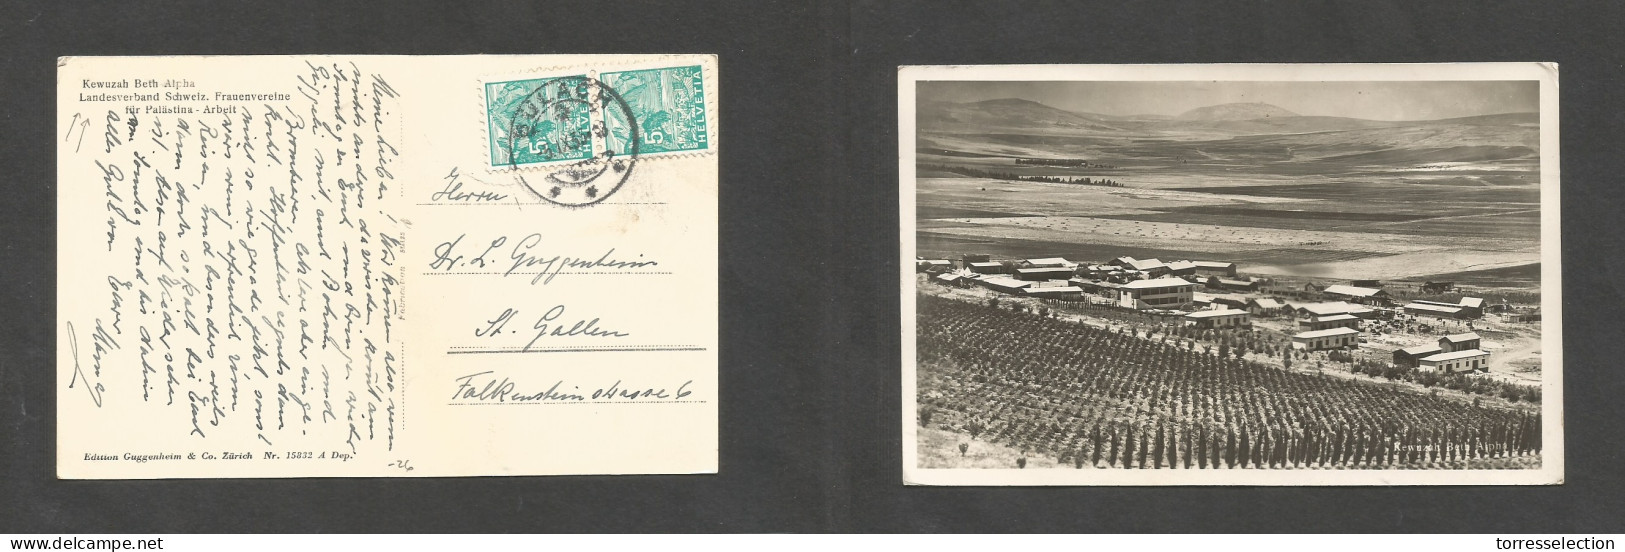 PALESTINE. 1935 (3 Sept) Photo View Ppc Of KEWUZAH BETH ALPHA. Womens Camp For Palestine. Circulated Locally In Switzerl - Palestina